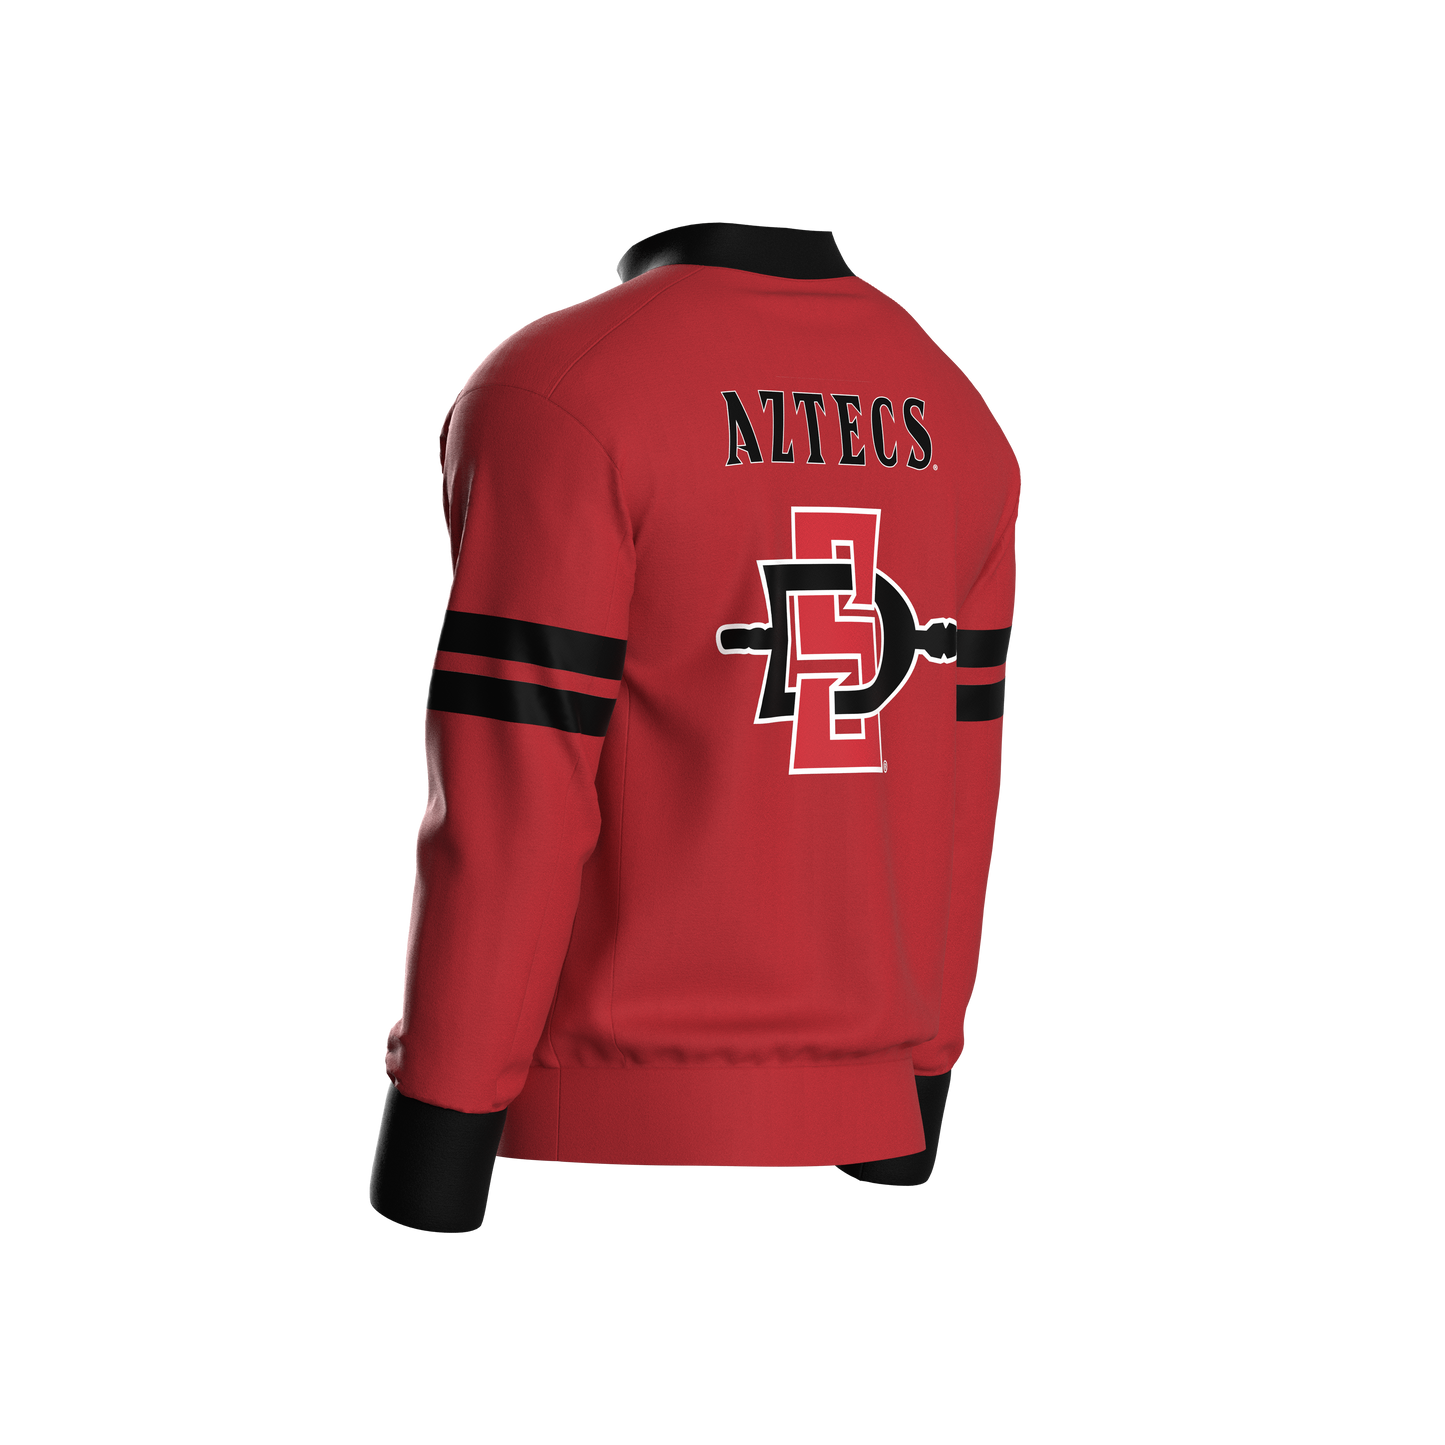 San Diego State University Home Pullover (youth)